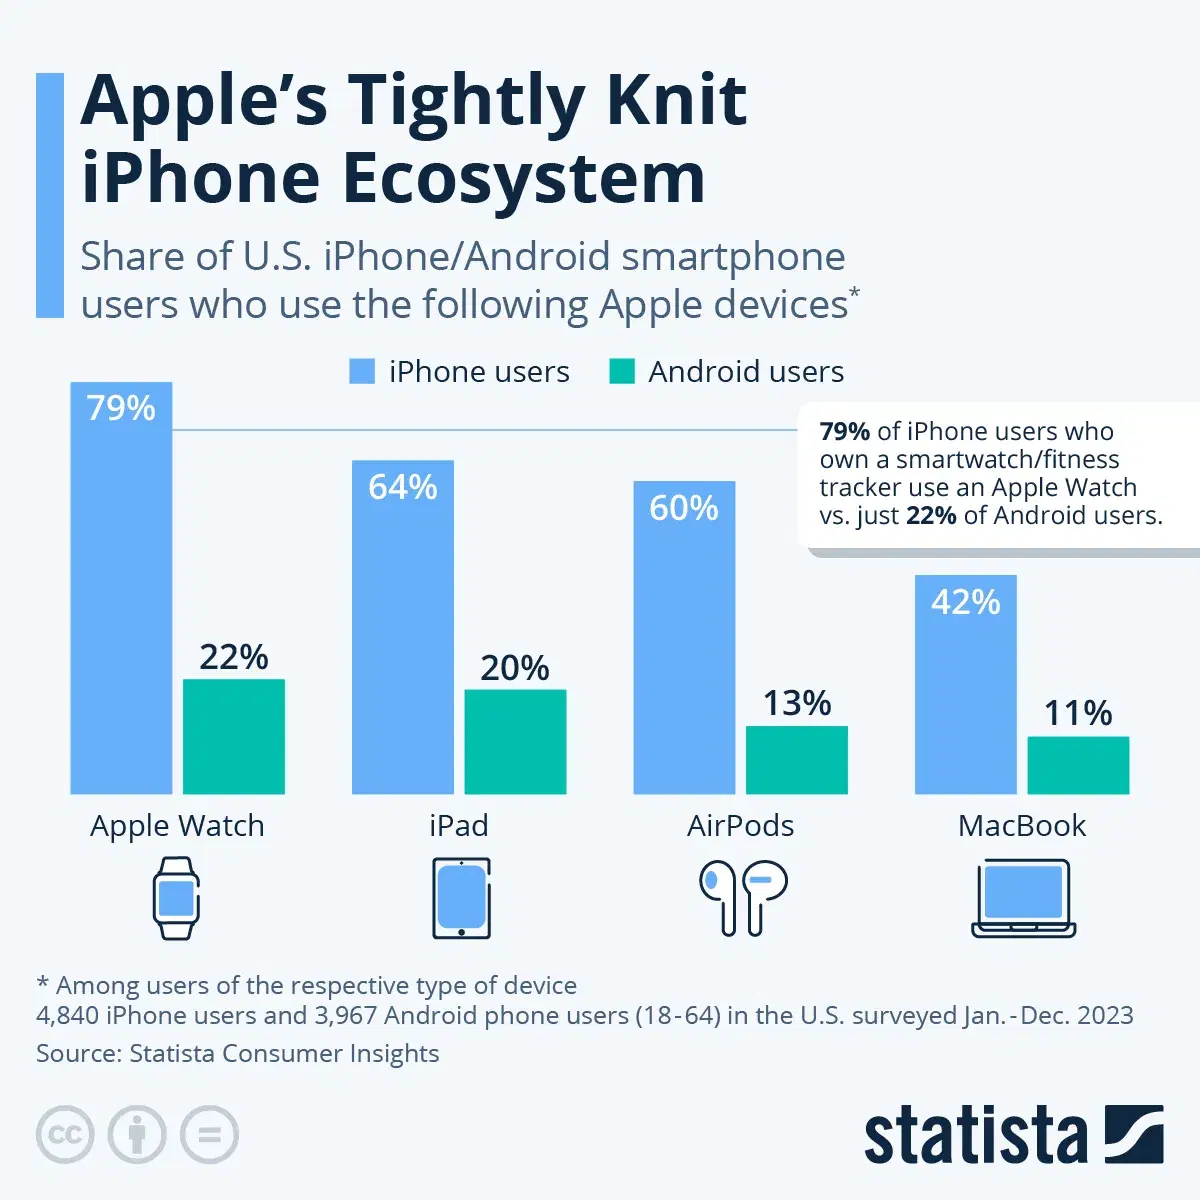 Apple's Tightly Knit iPhone Ecosystem